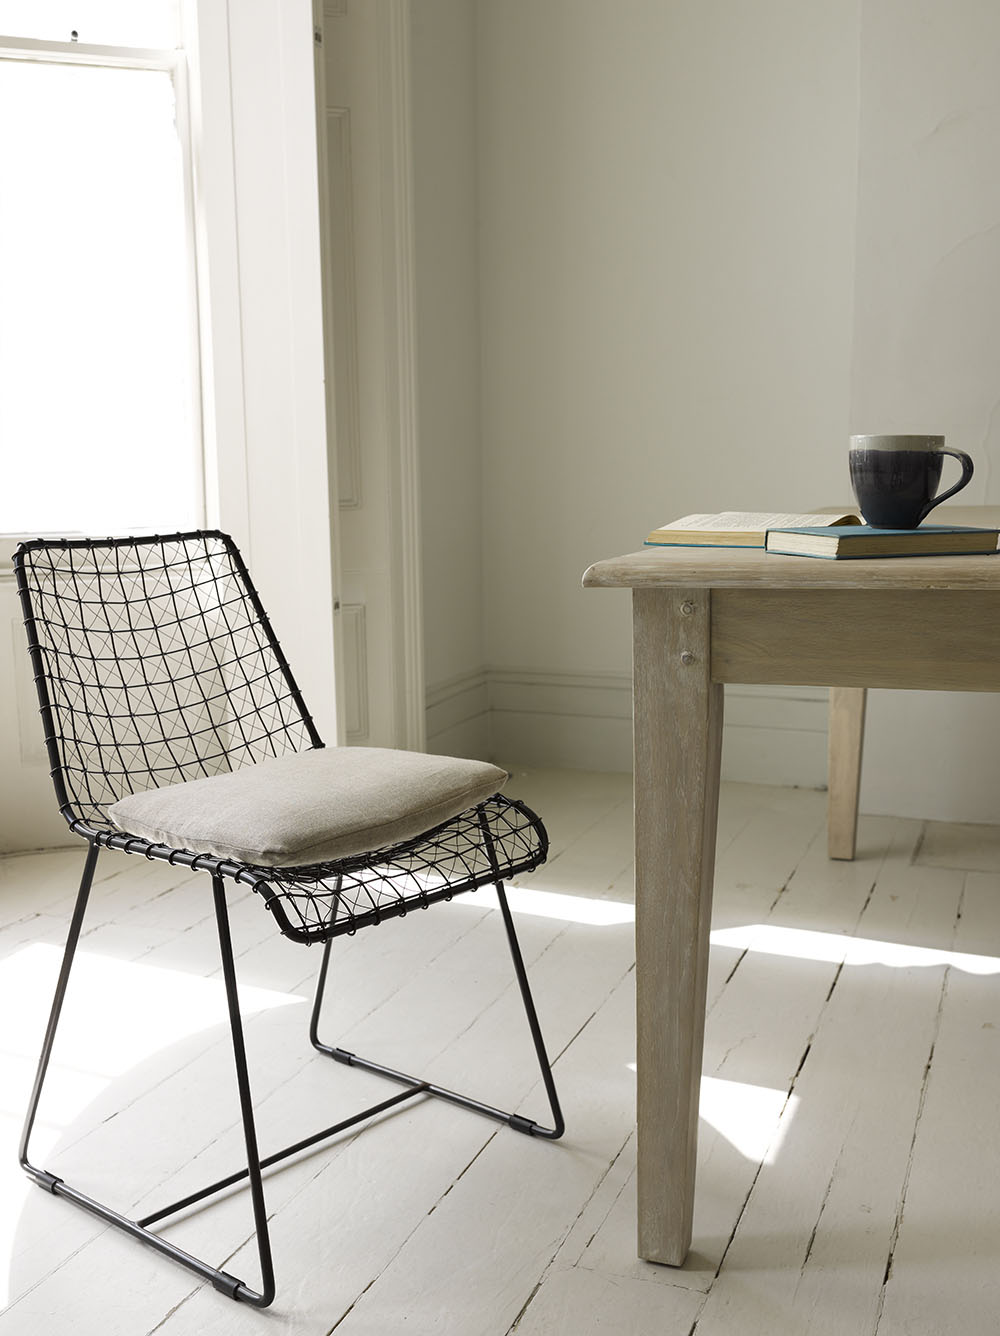 Loaf - Geronimo Gunmetal chair £290 per pair with Bayonne kitchen table £695 low-res